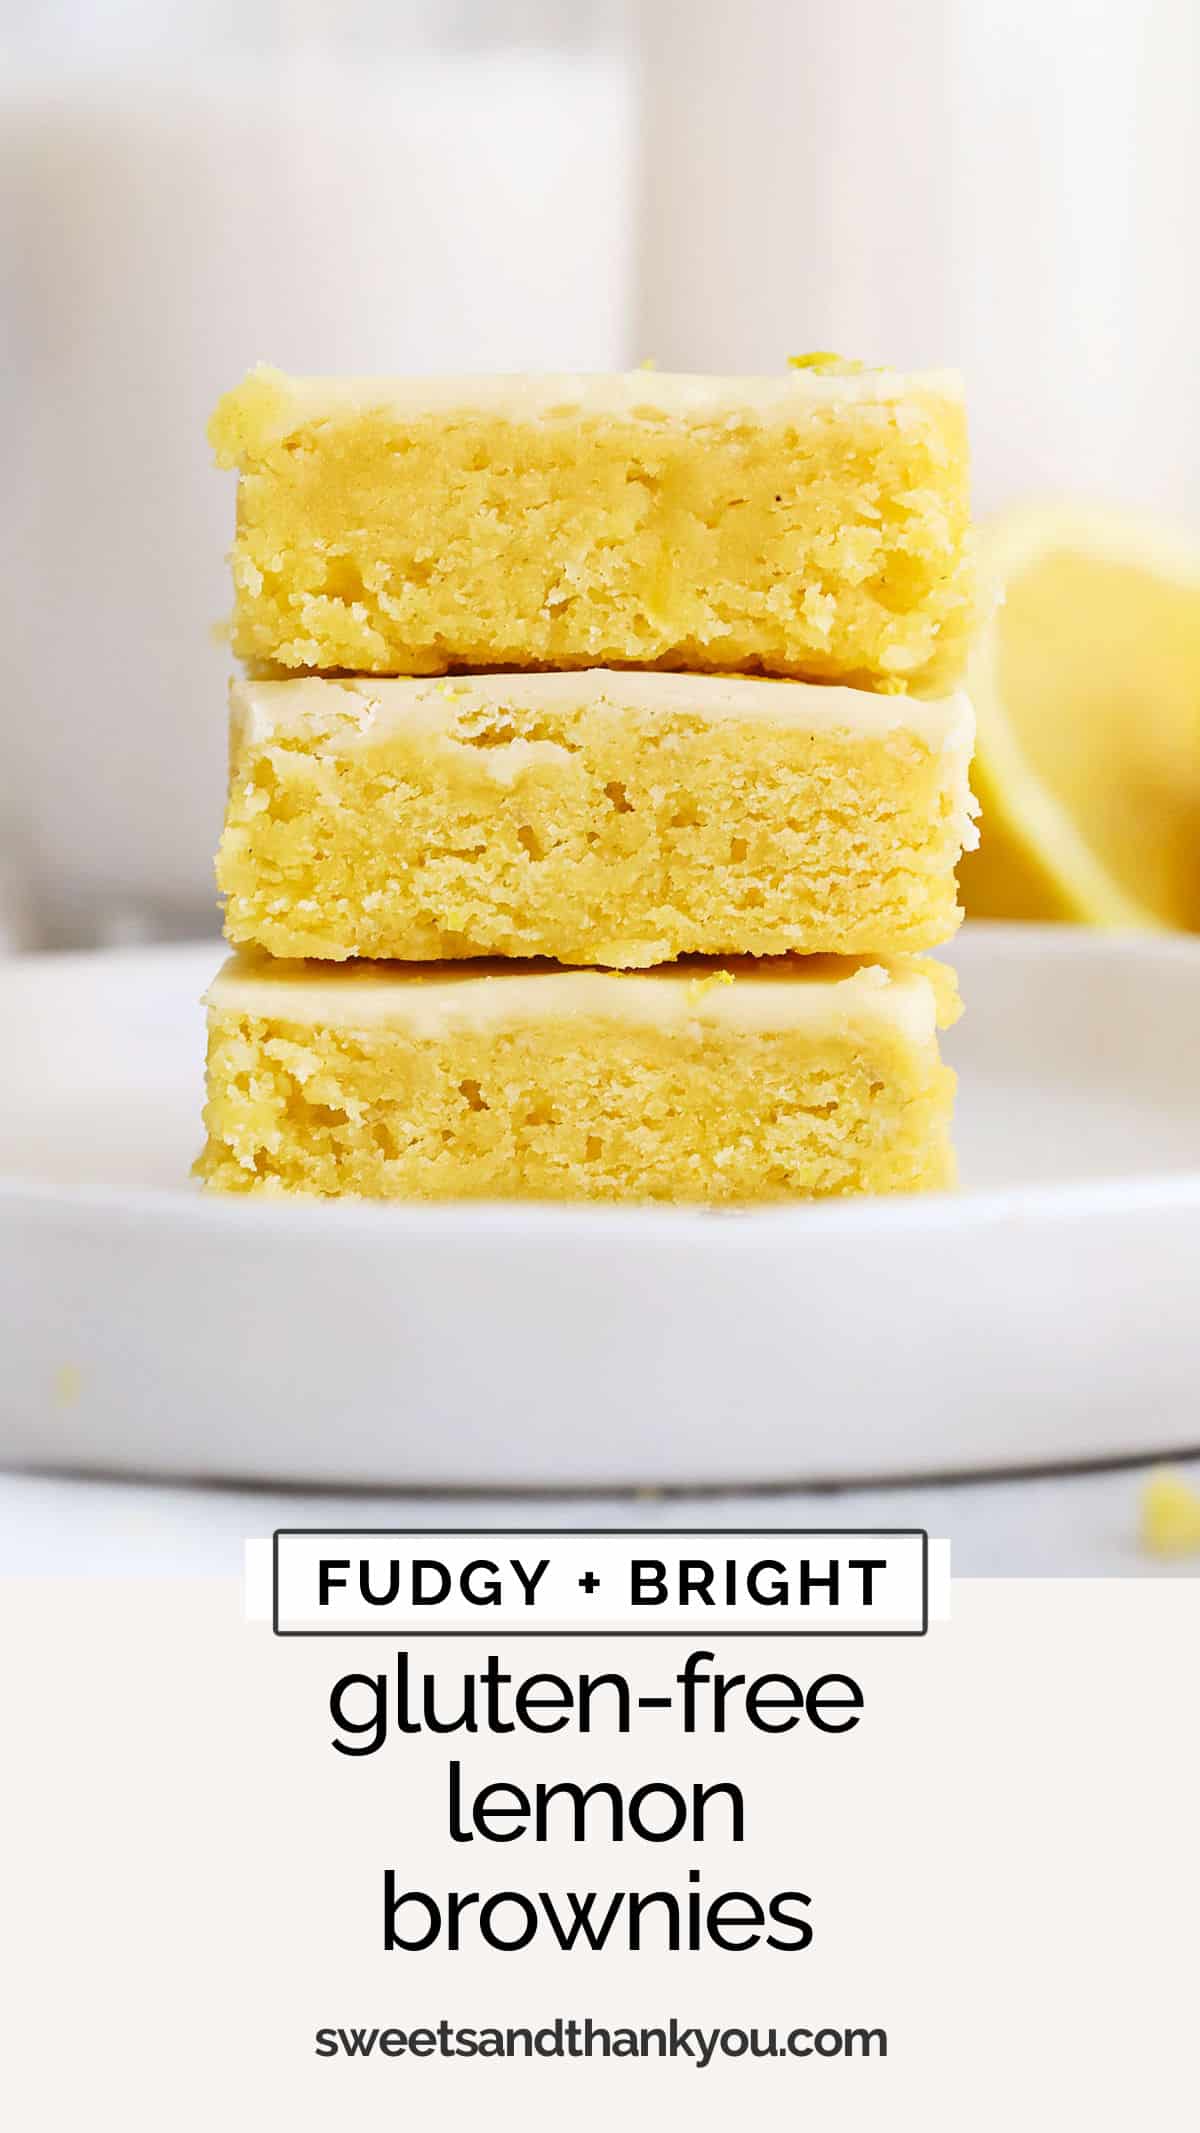 This Gluten-Free Lemon Brownies recipe in unlike any other brownie recipe you've tried! These fudgy lemon brownies are full of zesty citrus flavor--like taking a bite out of sunshine! They're a perfect Easter dessert or spring treat! 